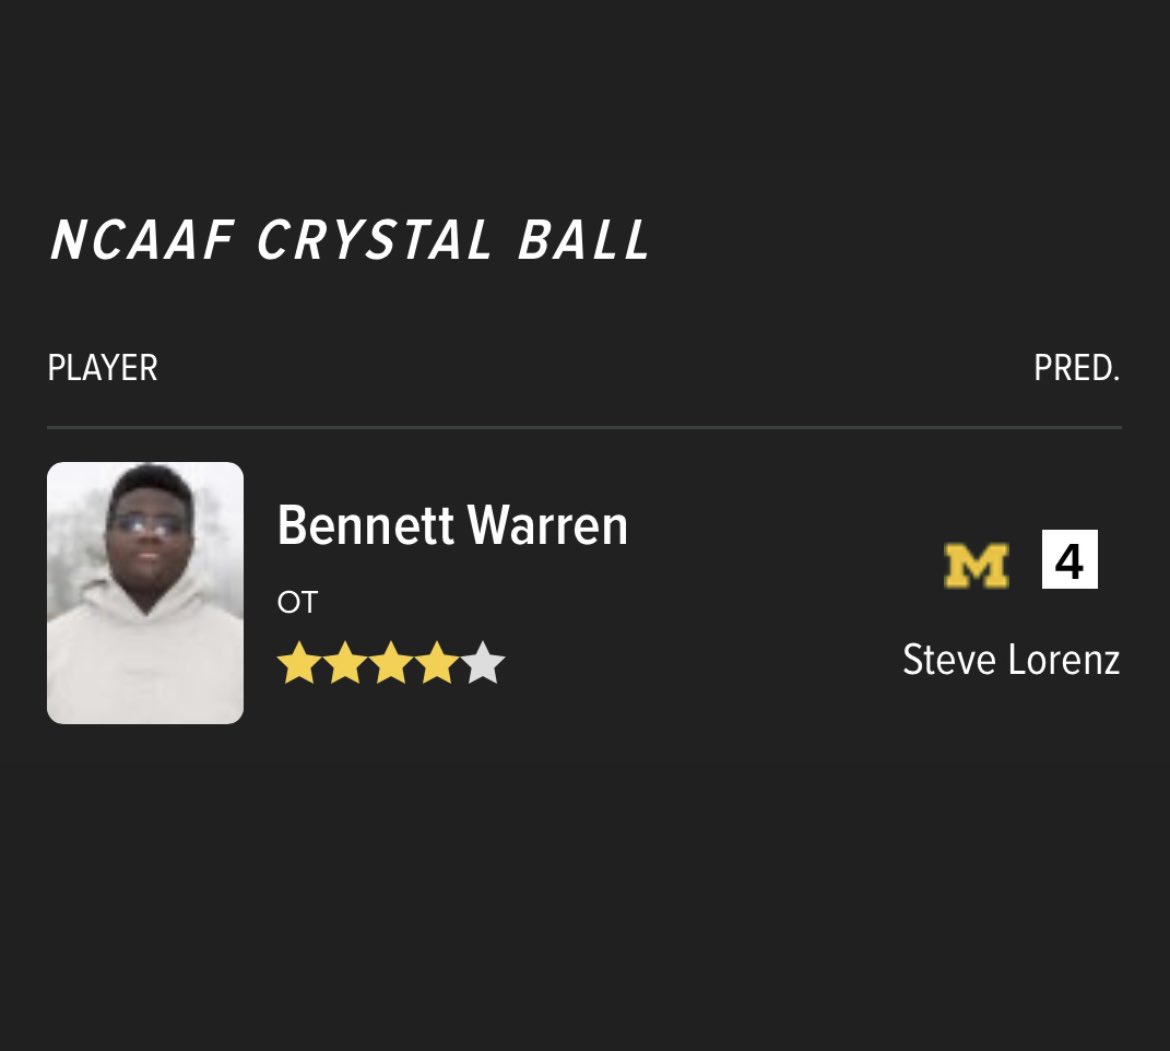 2024 4⭐️ OT Bennett Warren has been crystal balled to Michigan 

The 6’8 330 pound prospect from Sugar Land, TX is scheduled to officially visit Michigan this weekend #GoBlue